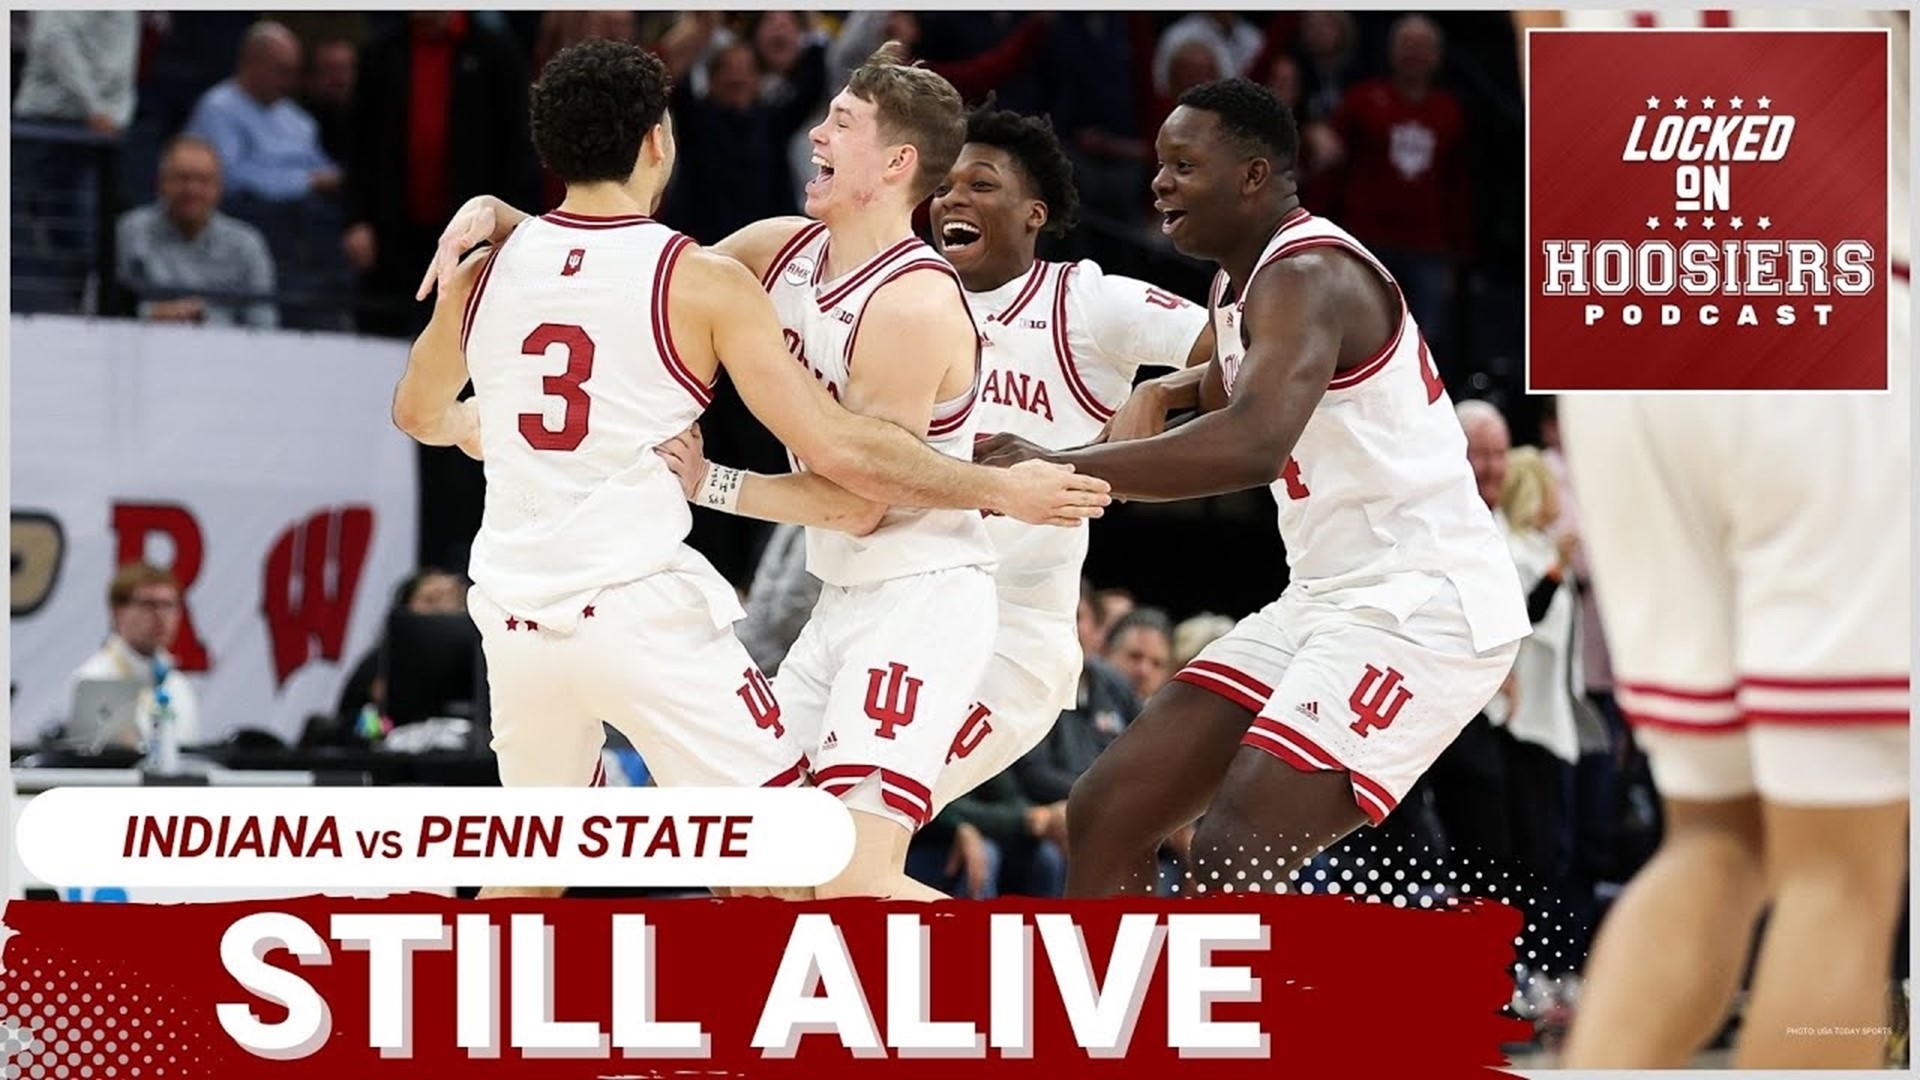 Mike Woodson and the Indiana Hoosiers defeated Penn State in the Big Ten Tournament 61-59 thanks to a game-winning putback by Senior Anthony Leal.